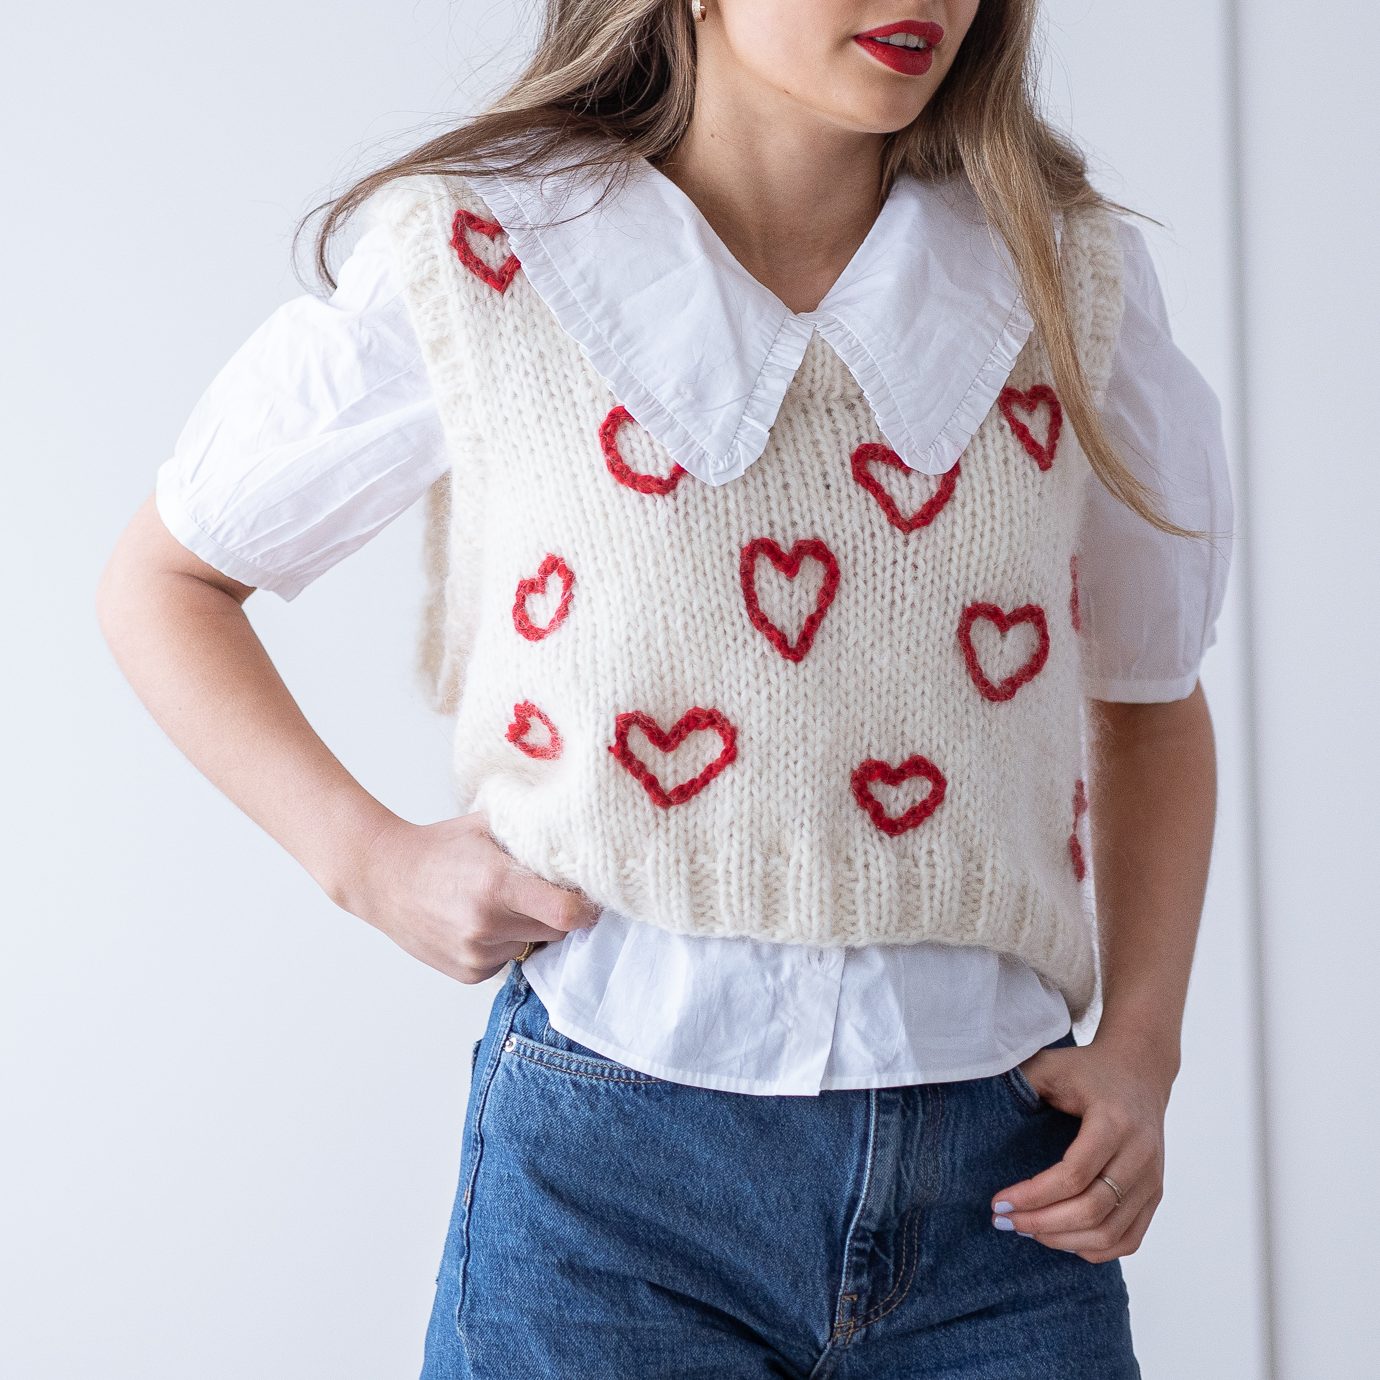  - Hearts Out vest | Slipover women | Knitting pattern- by HipKnitShop - 11/08/2021